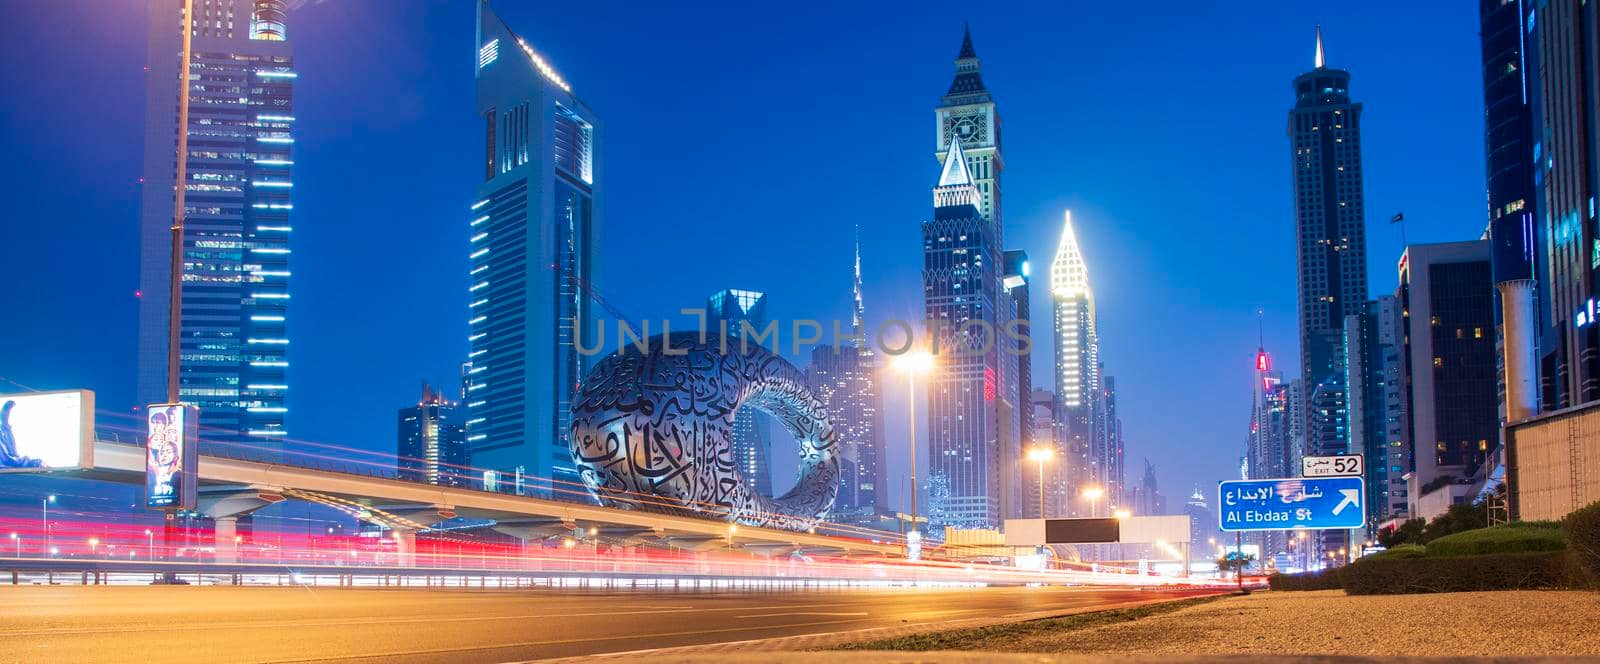 Main road of a United Arab Emirates, Shekh Zayed road. Shot taken in Dubai. Many of famous buildings can be seen as well as metro station and "Museum of future" Outdoors